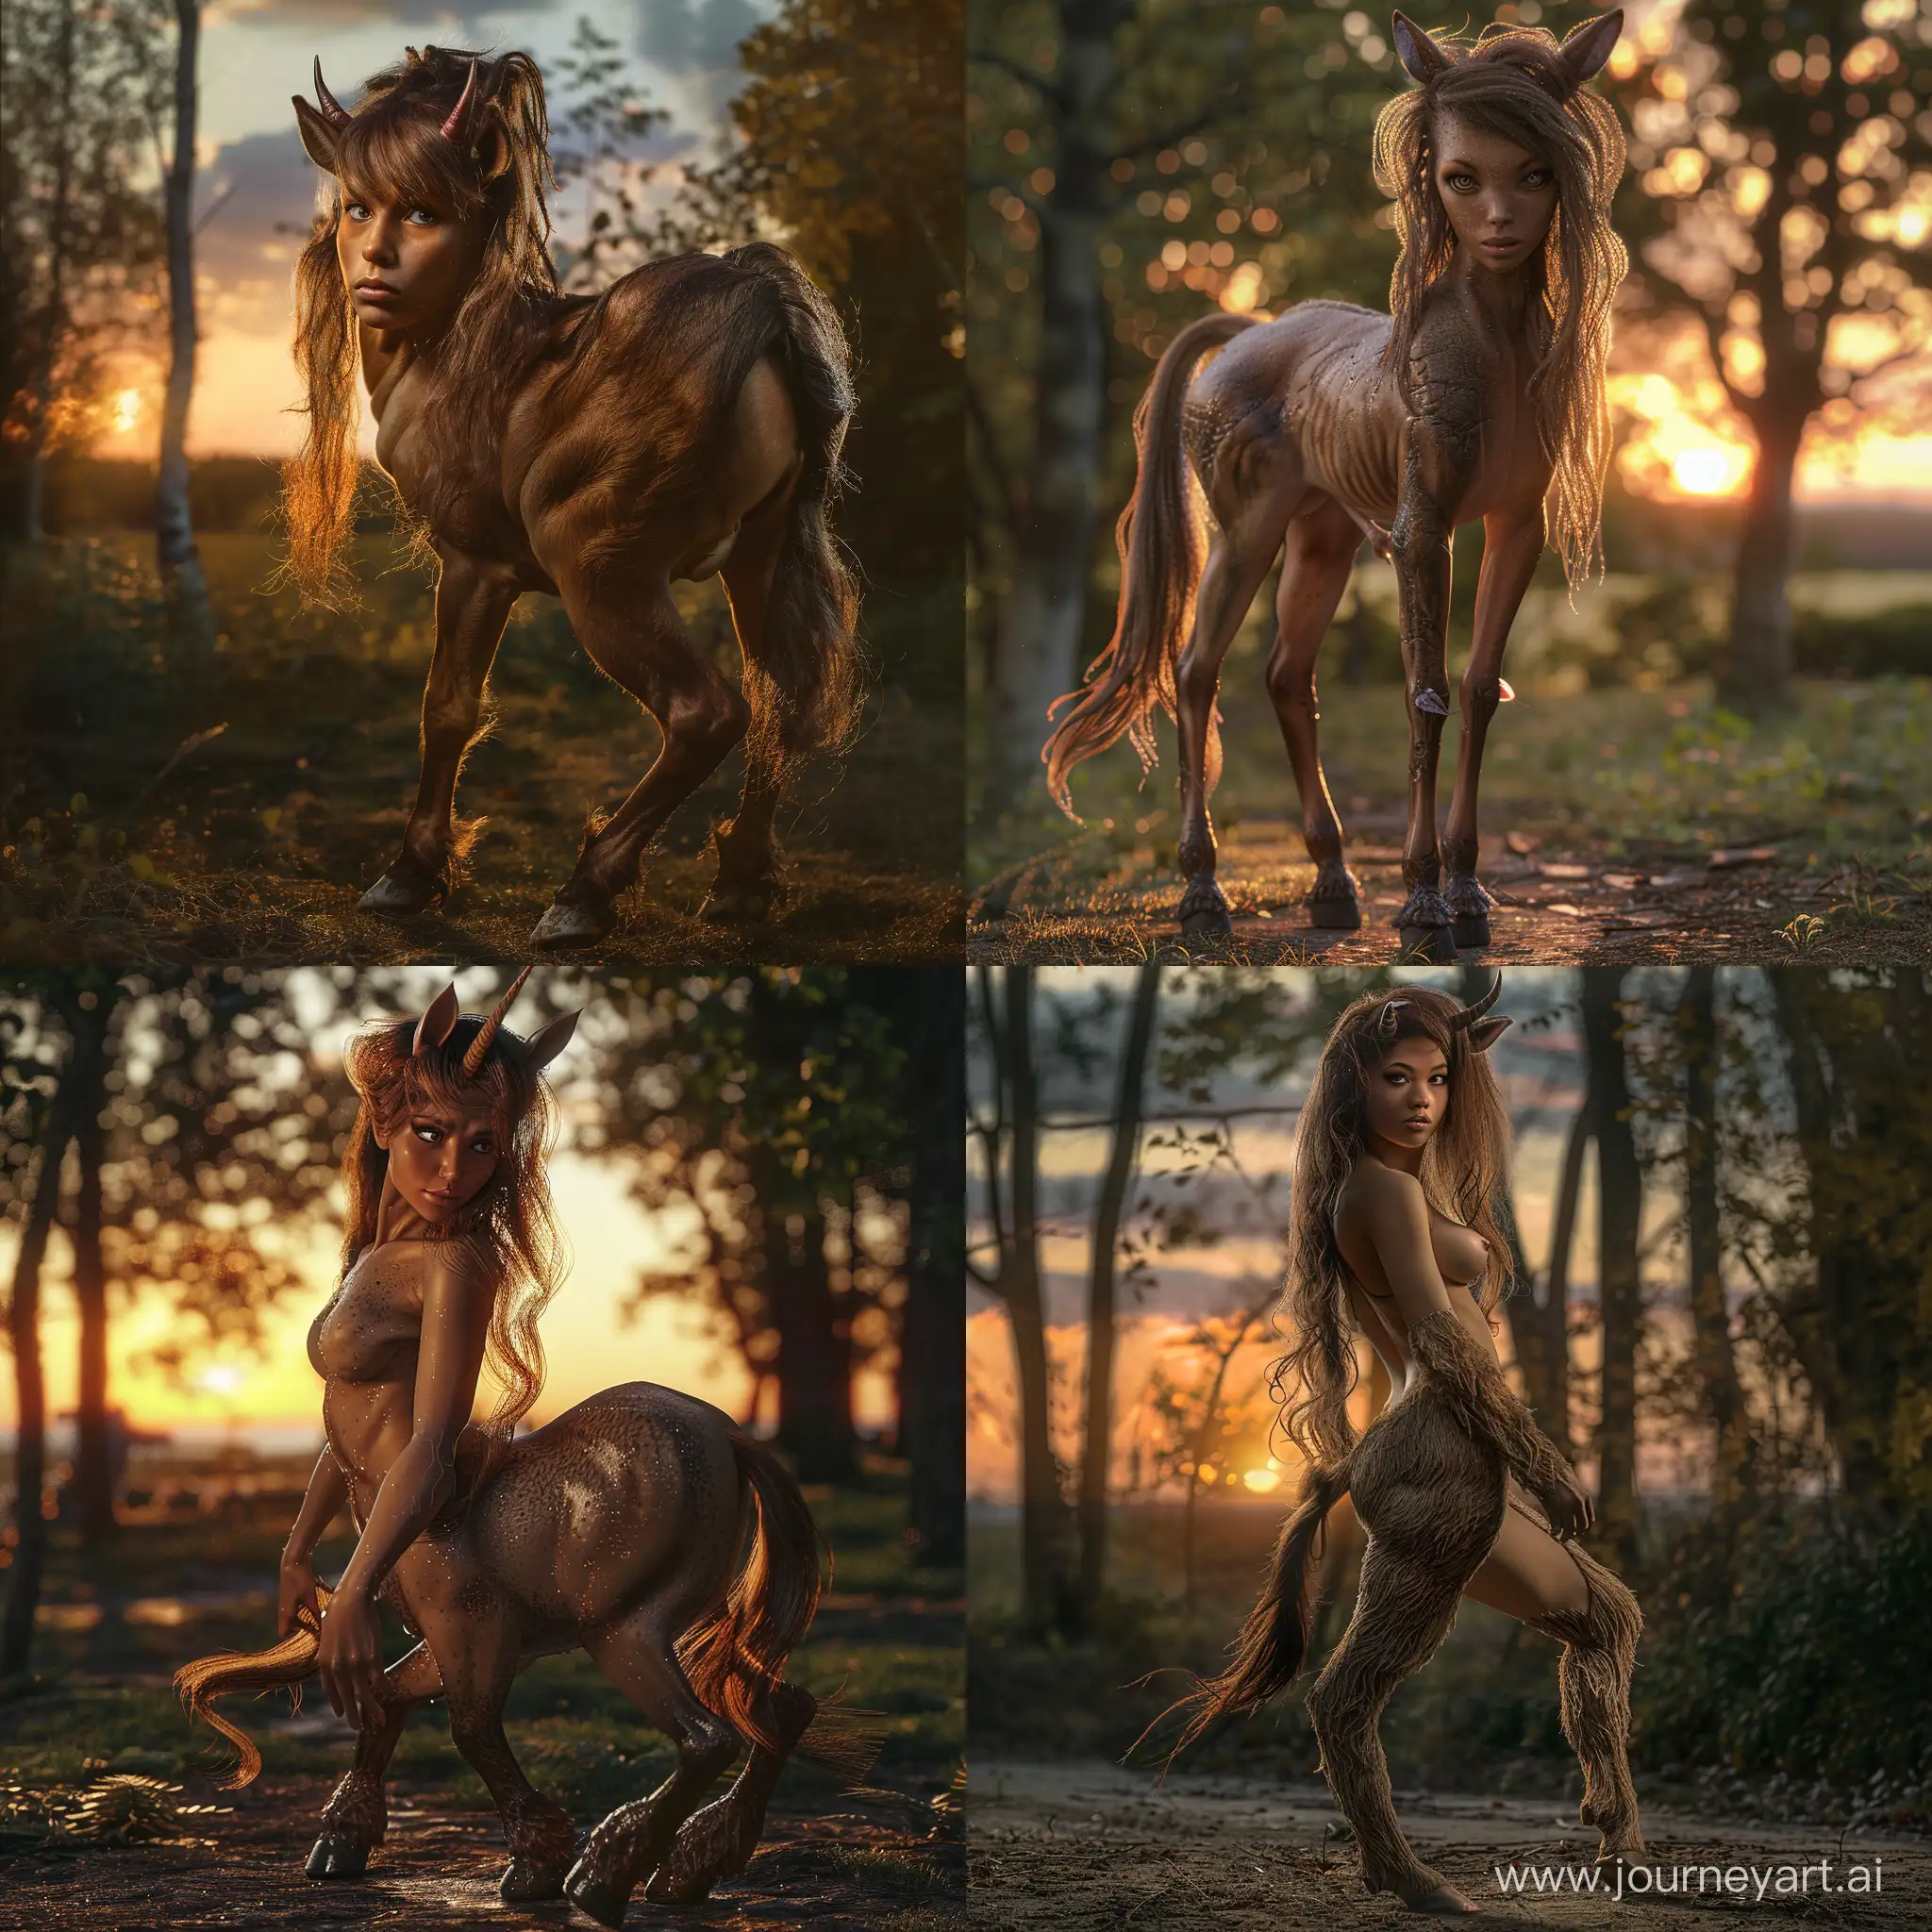 A female centaur. She has loose brown hair. She has hooves and a tail. She is standing on all fours in a forest at sunset. Realistic photograph, full body picture